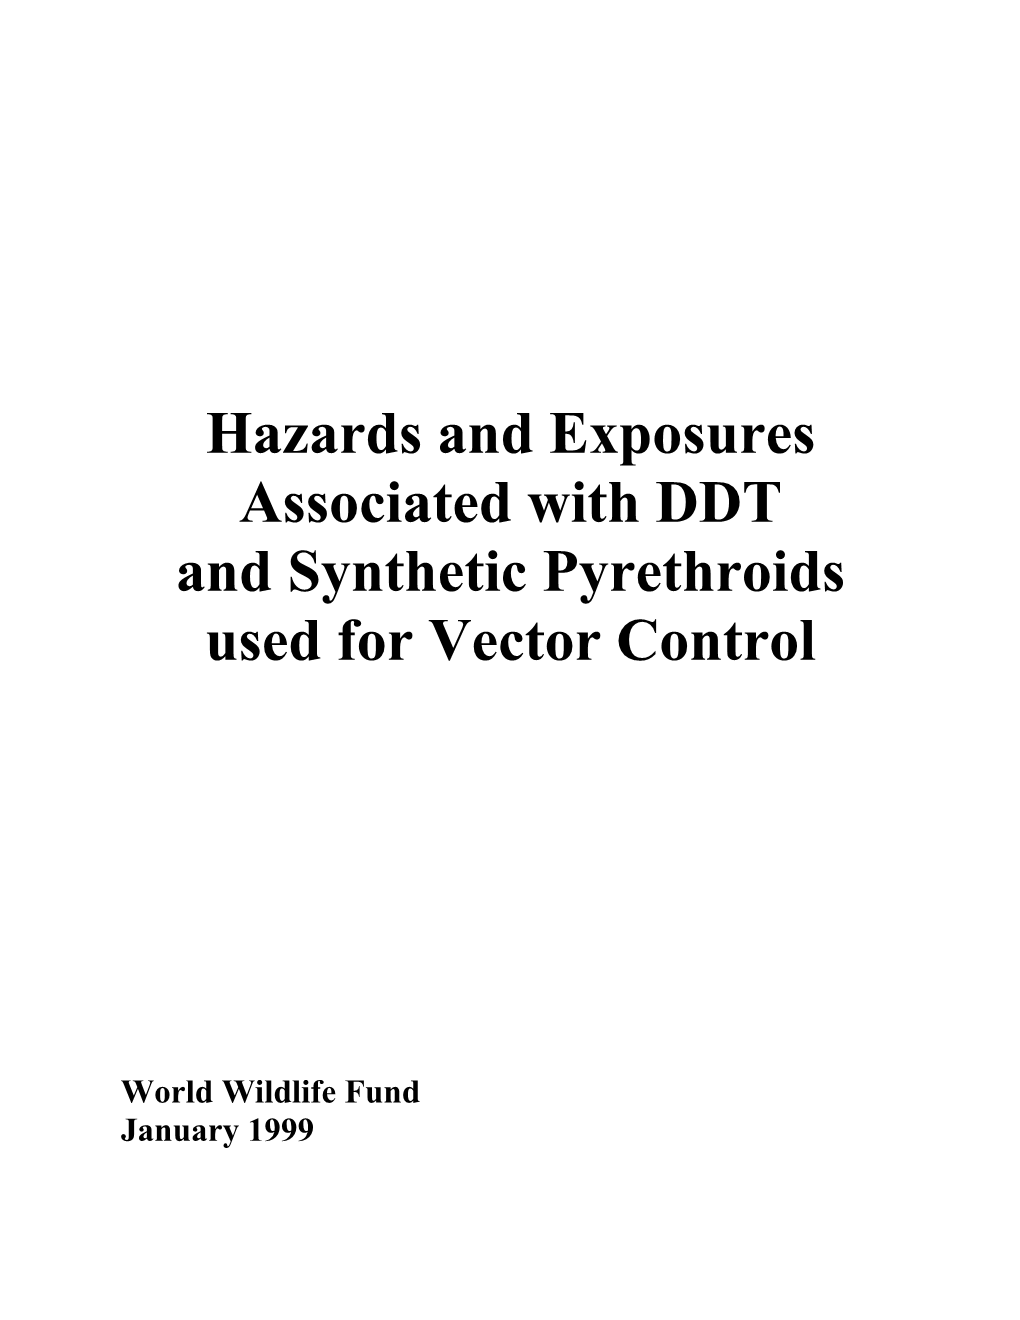 Hazards and Exposures Associated with DDT